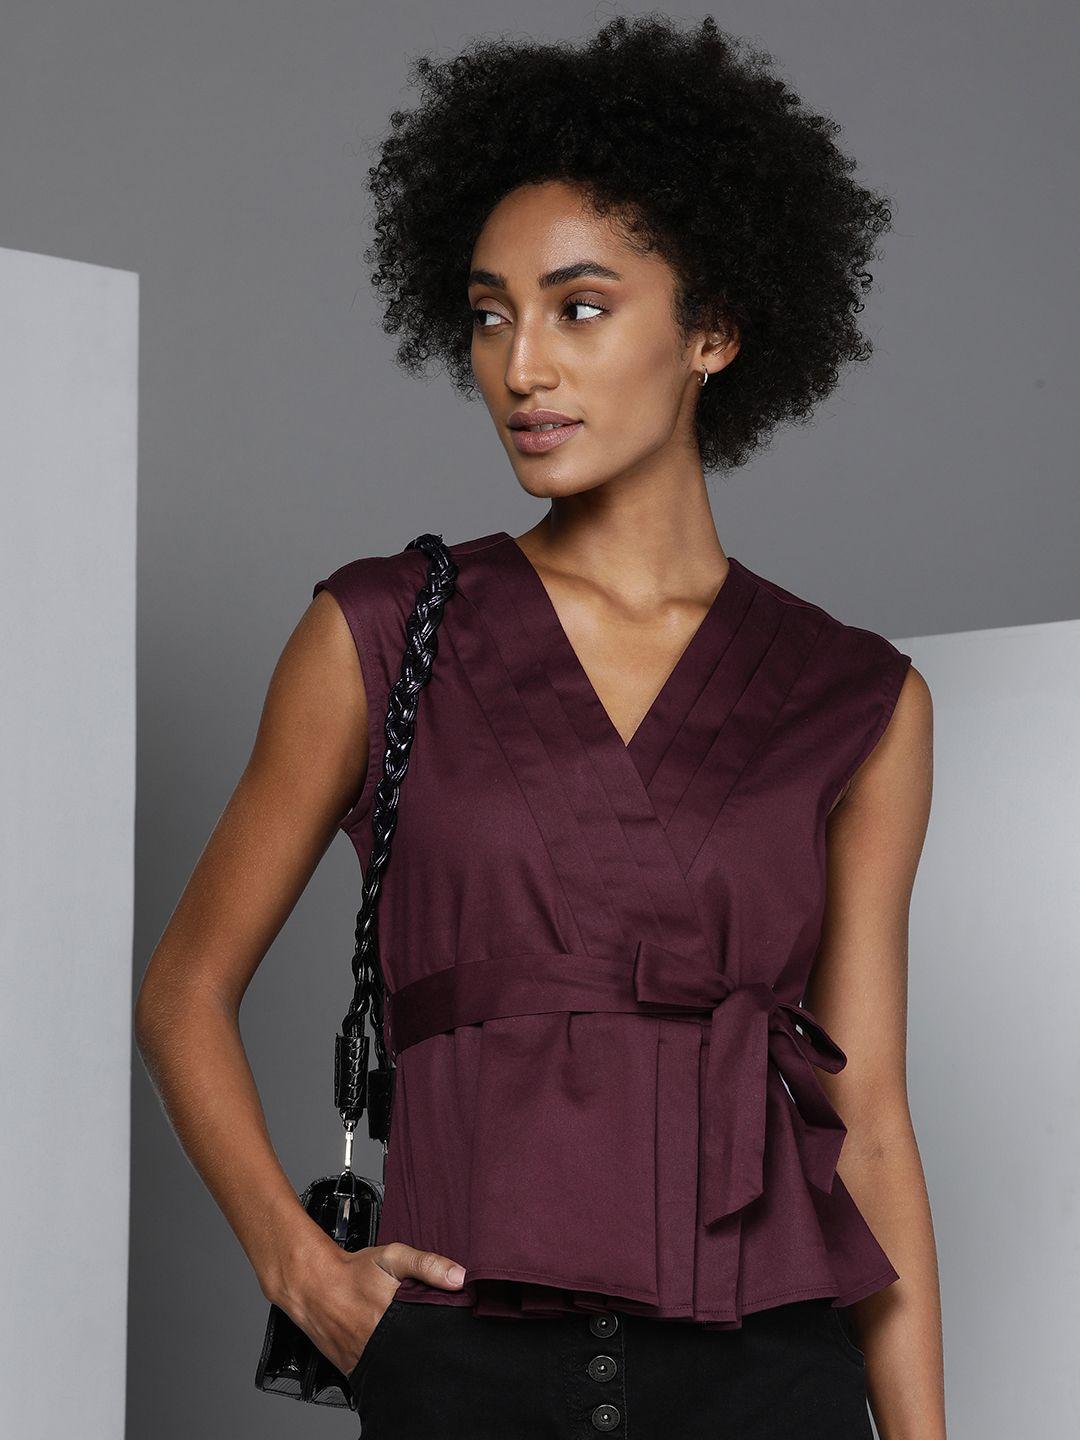 kenneth-cole-women-a-la-mode-maroon-solid-v--neck-signature-top-with-belt